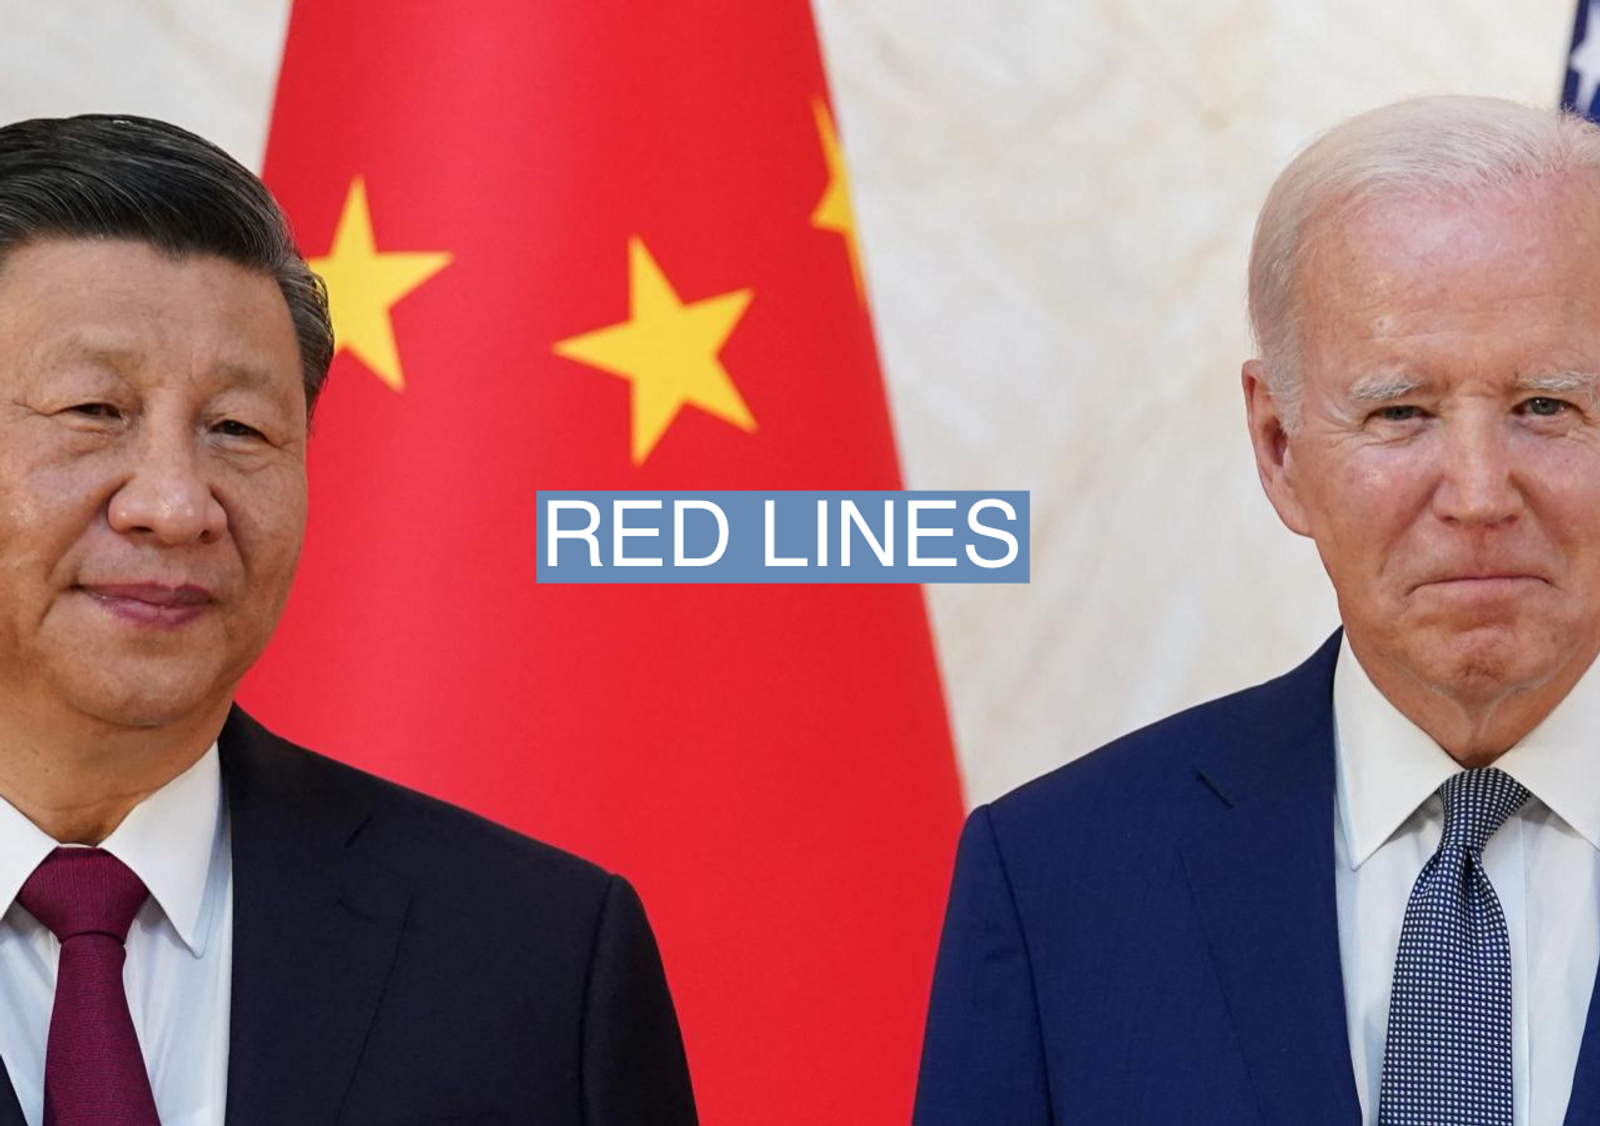 U.S. President Joe Biden meets with Chinese President Xi Jinping on the sidelines of the G20 leaders' summit in Bali, Indonesia, November 14, 2022.